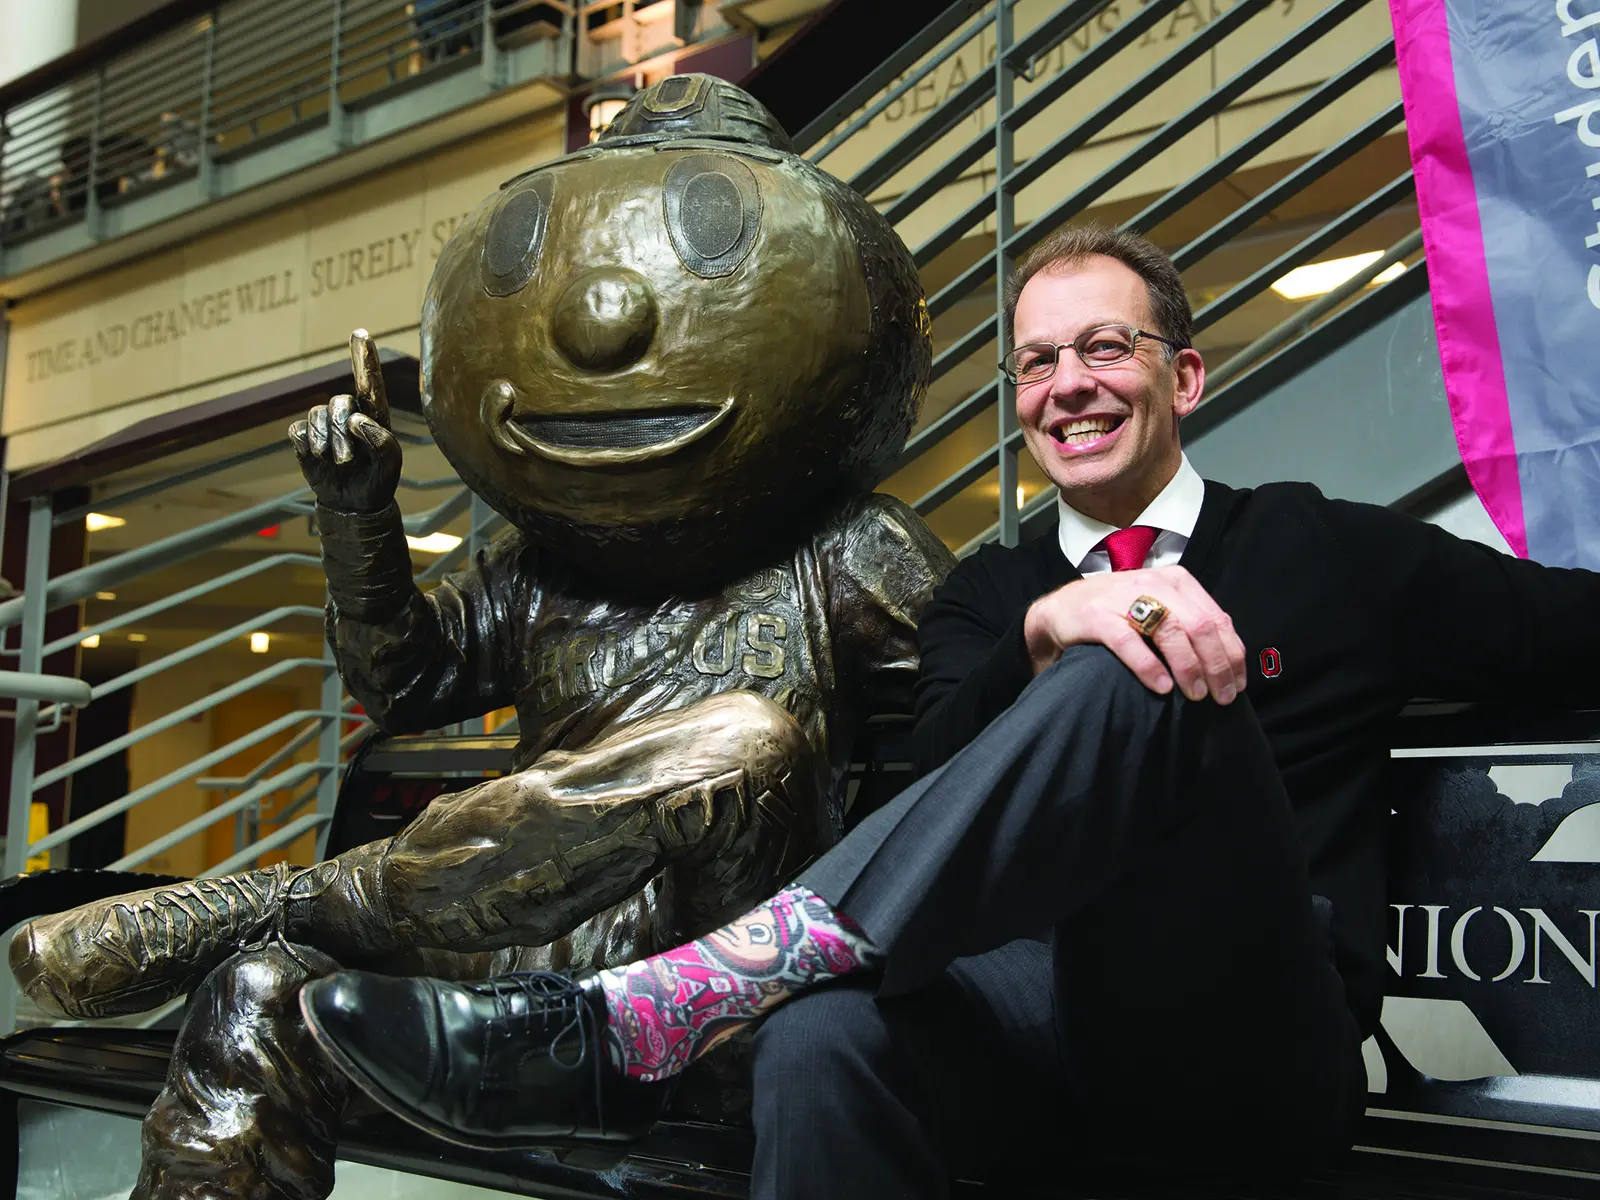 A man smiles as he sits on a bench next to a bronze statue of Brutus. Their leg-crossed poses and smiles are similar.